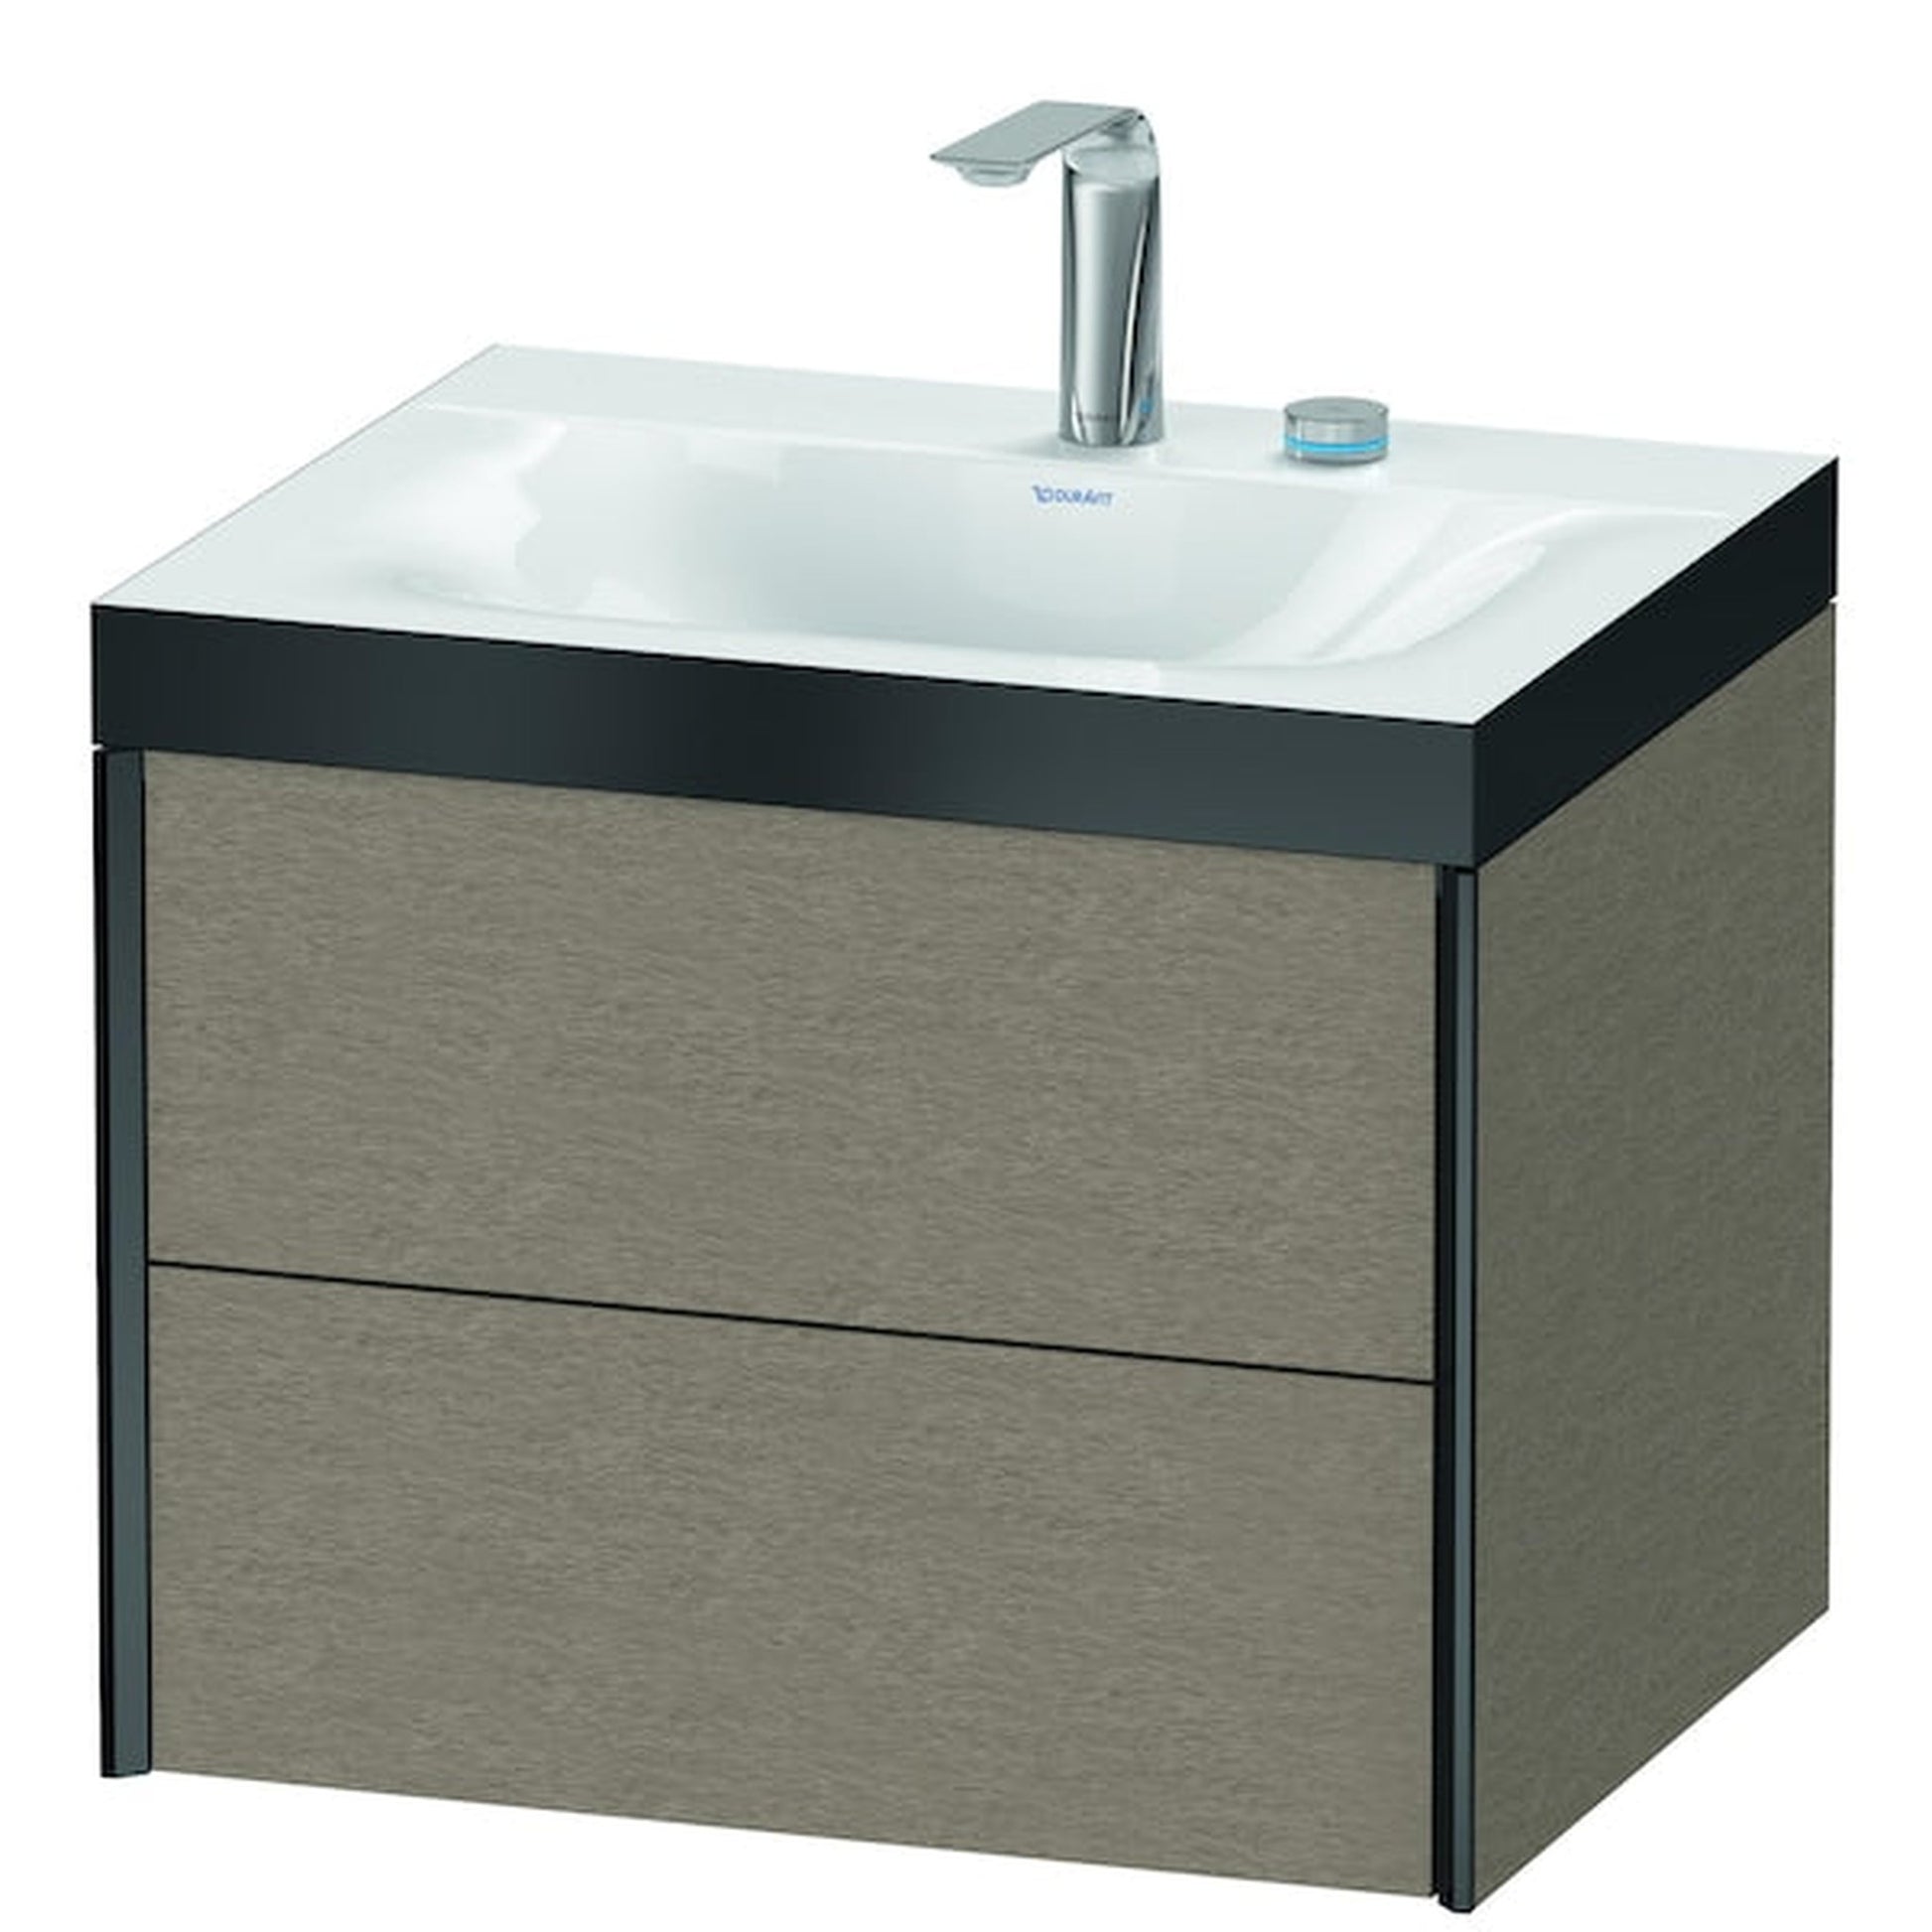 Duravit Xviu 24" x 20" x 19" Two Drawer C-Bonded Wall-Mount Vanity Kit With Two Tap Holes, Cashmere Oak (XV4614EB211P)